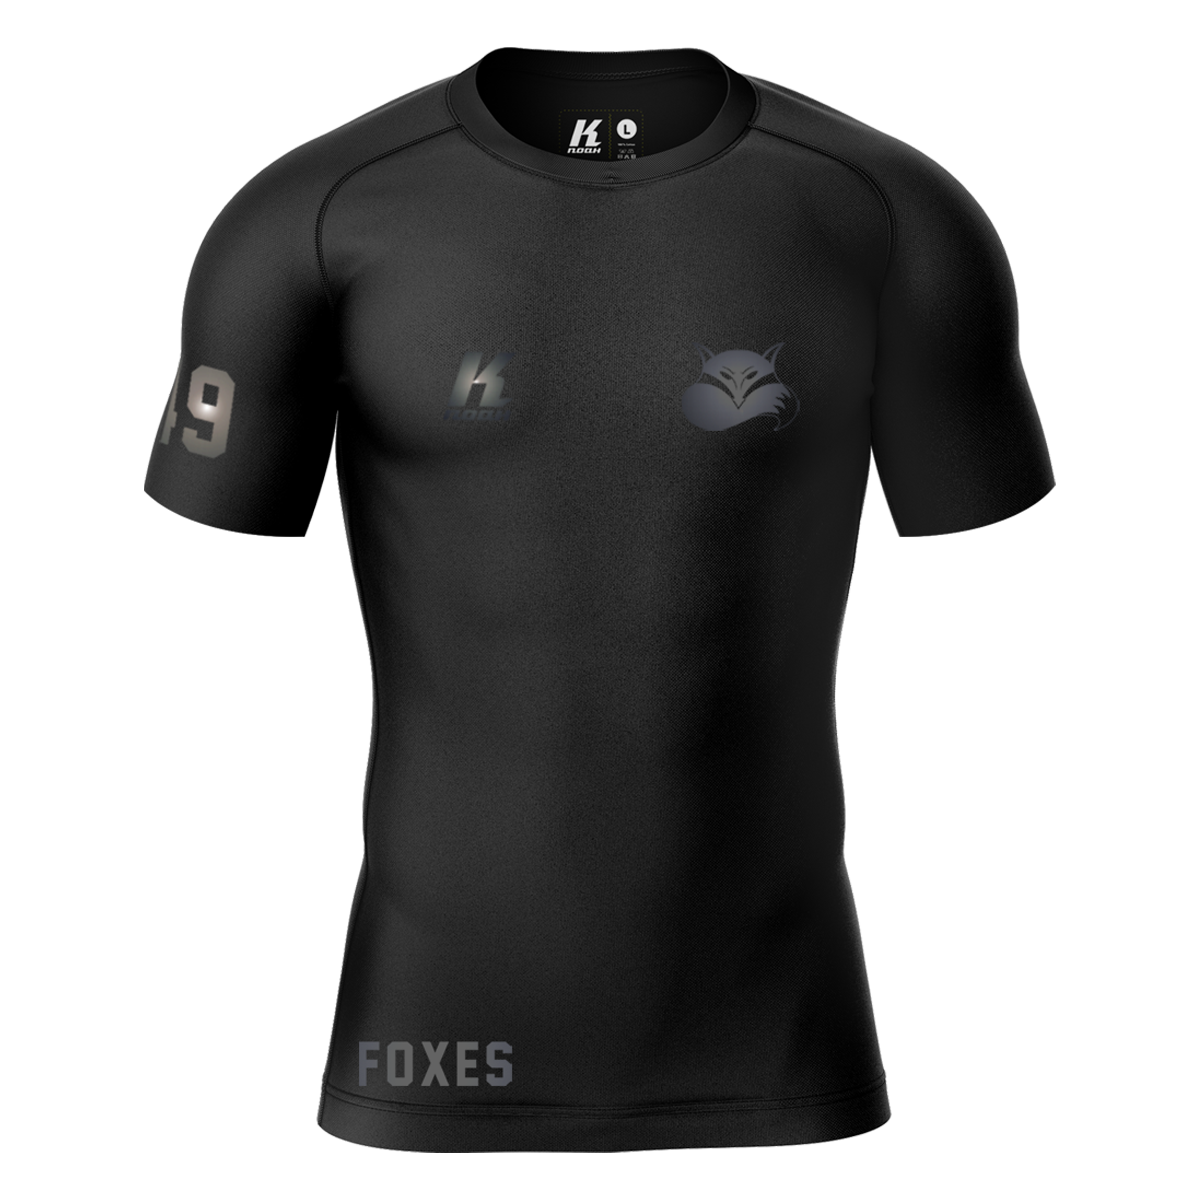 Foxes "Blackline" K.Tech Compression Shortsleeve Shirt with Playernumber/Initials